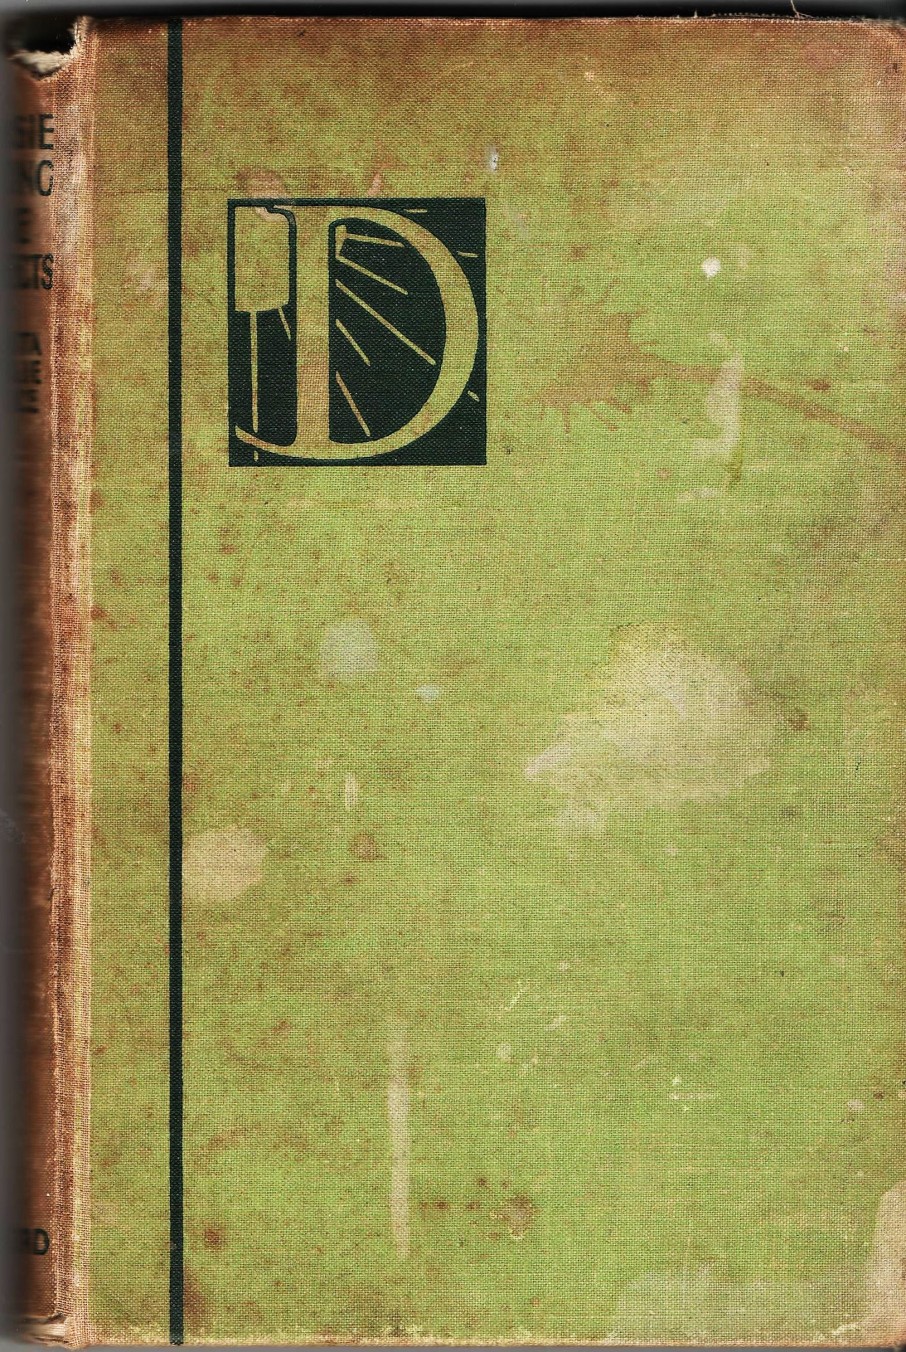 Cover of Dimsie Among the Prefects; faded green cloth with a letter D as decoration